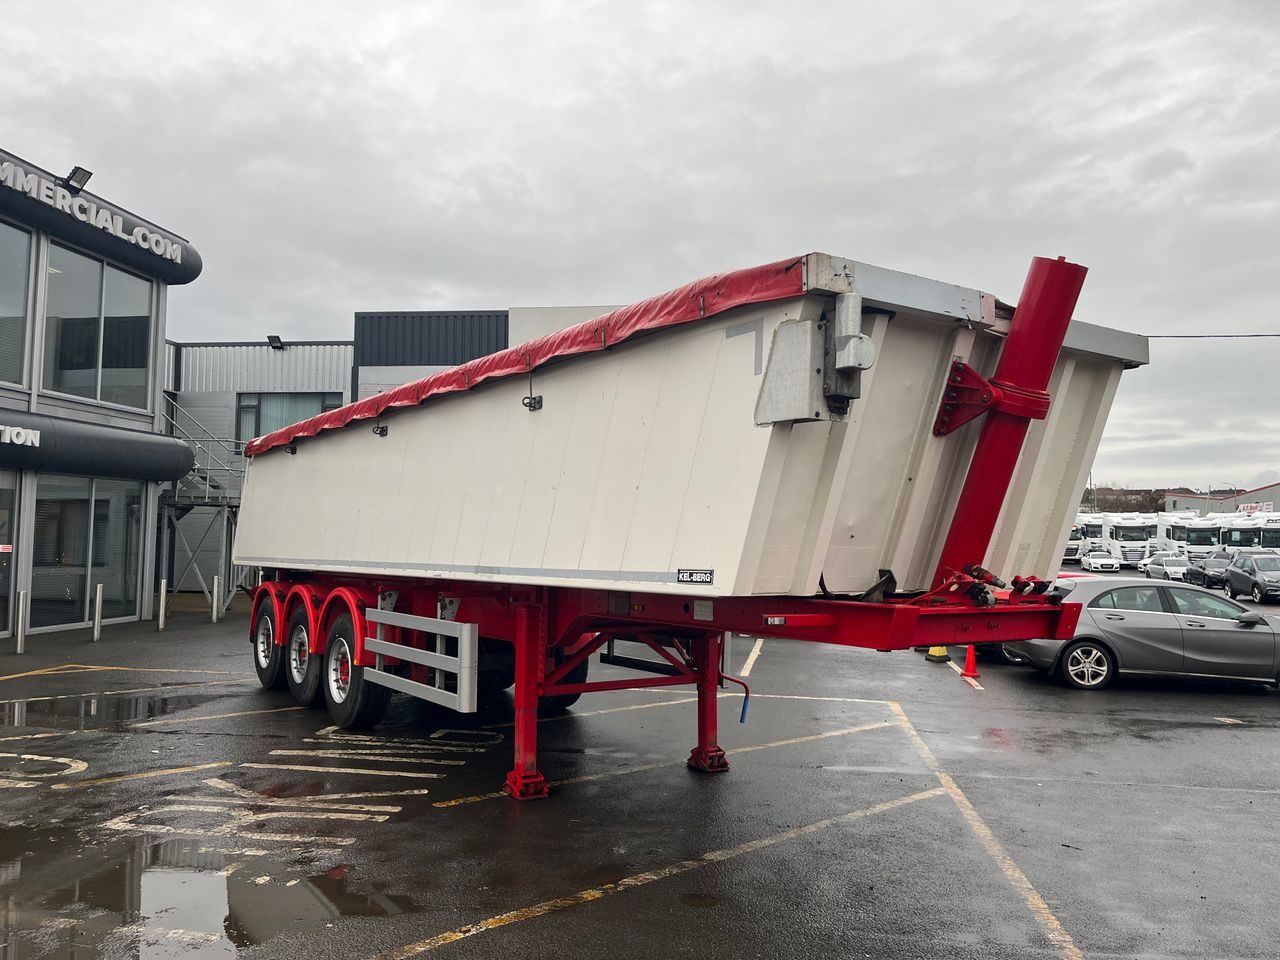 Ready to go Kelberg Triaxle Tipping Trailer, Trailers, , 40000, , , , -, - | for sale at MV Commercial, the UKs leading Truck, Trailers and Van supplier. (C459441 109263)